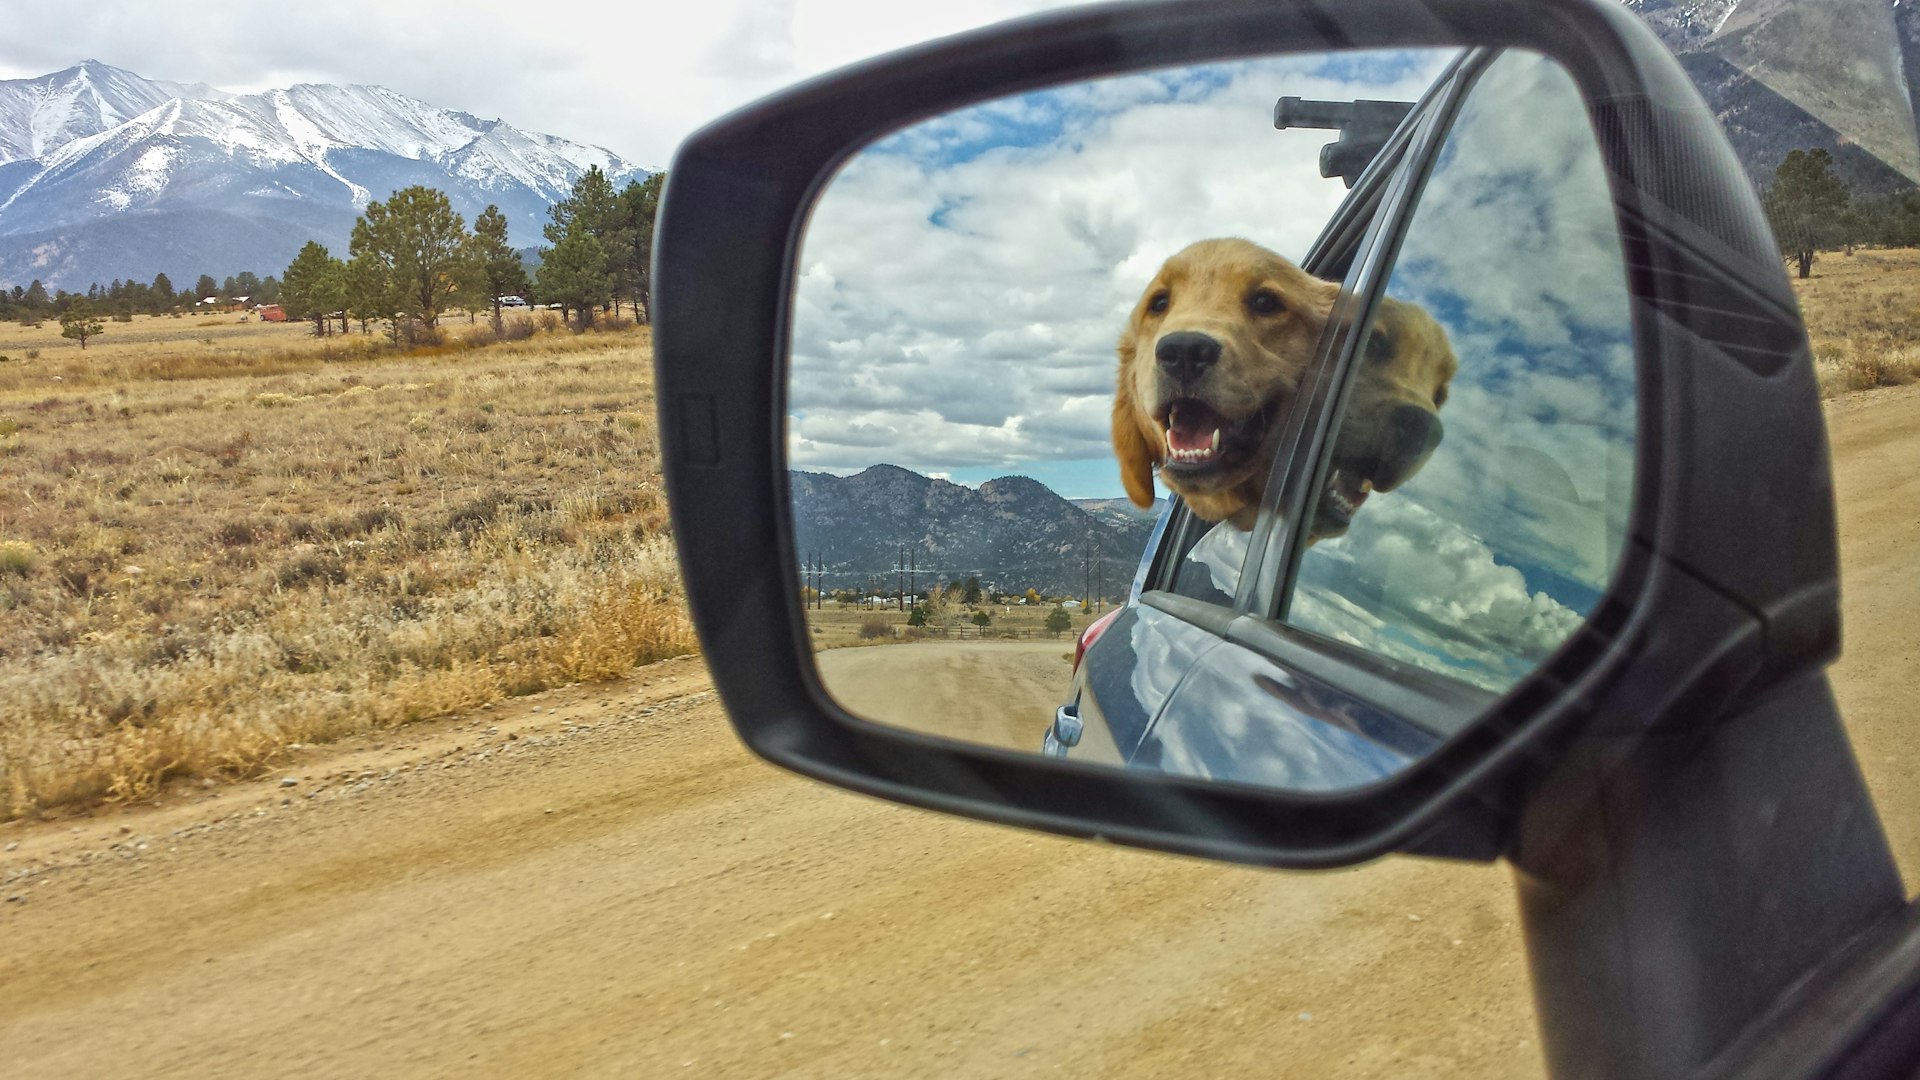 A golden retriever with its head out the window of a car, reflected in the rear-view mirror, against a backdrop of mountains, Colorado, USA